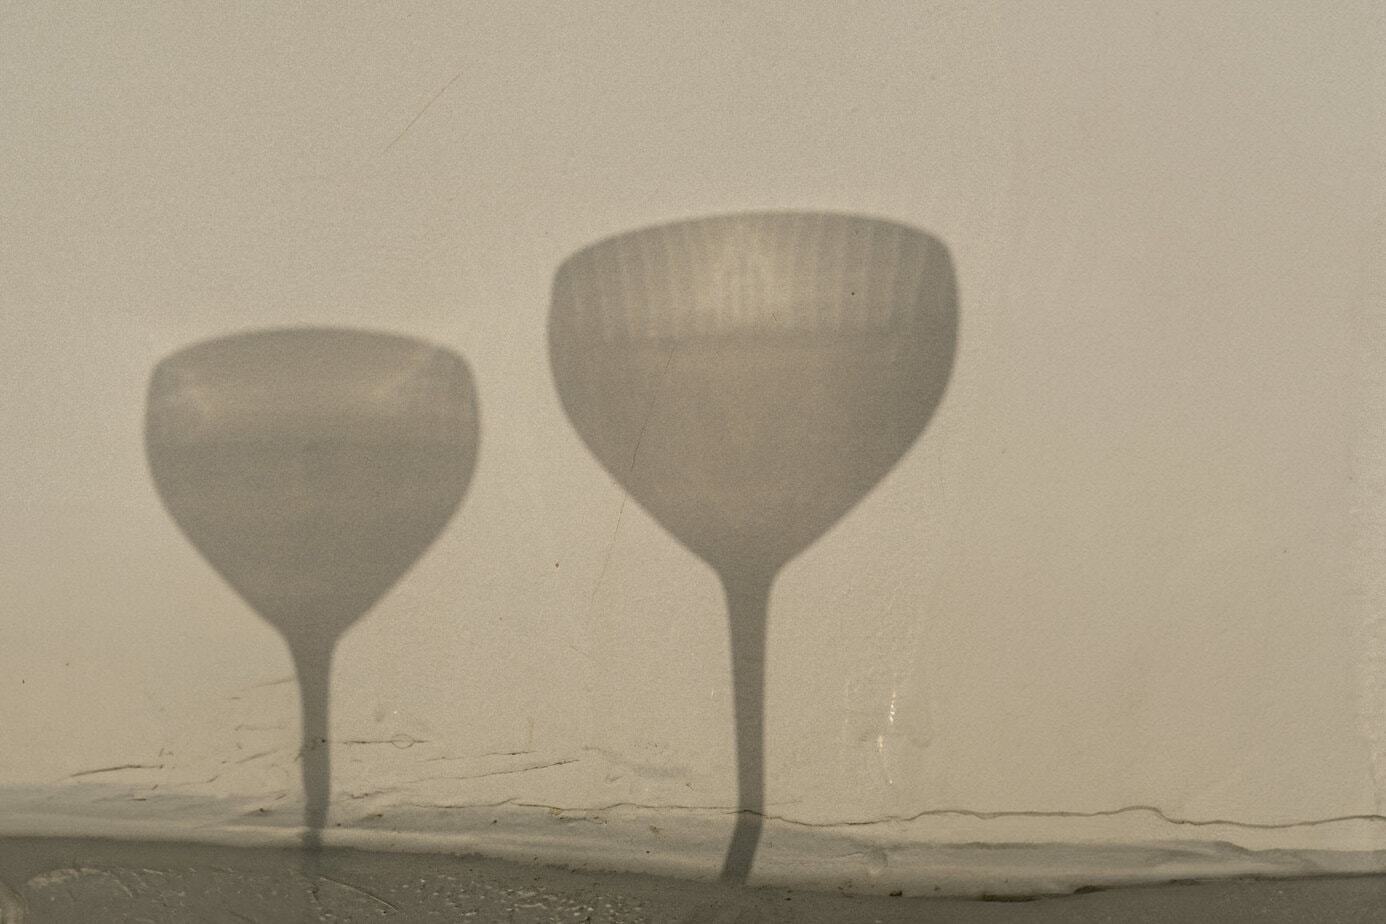 Shadow of two martini glasses.